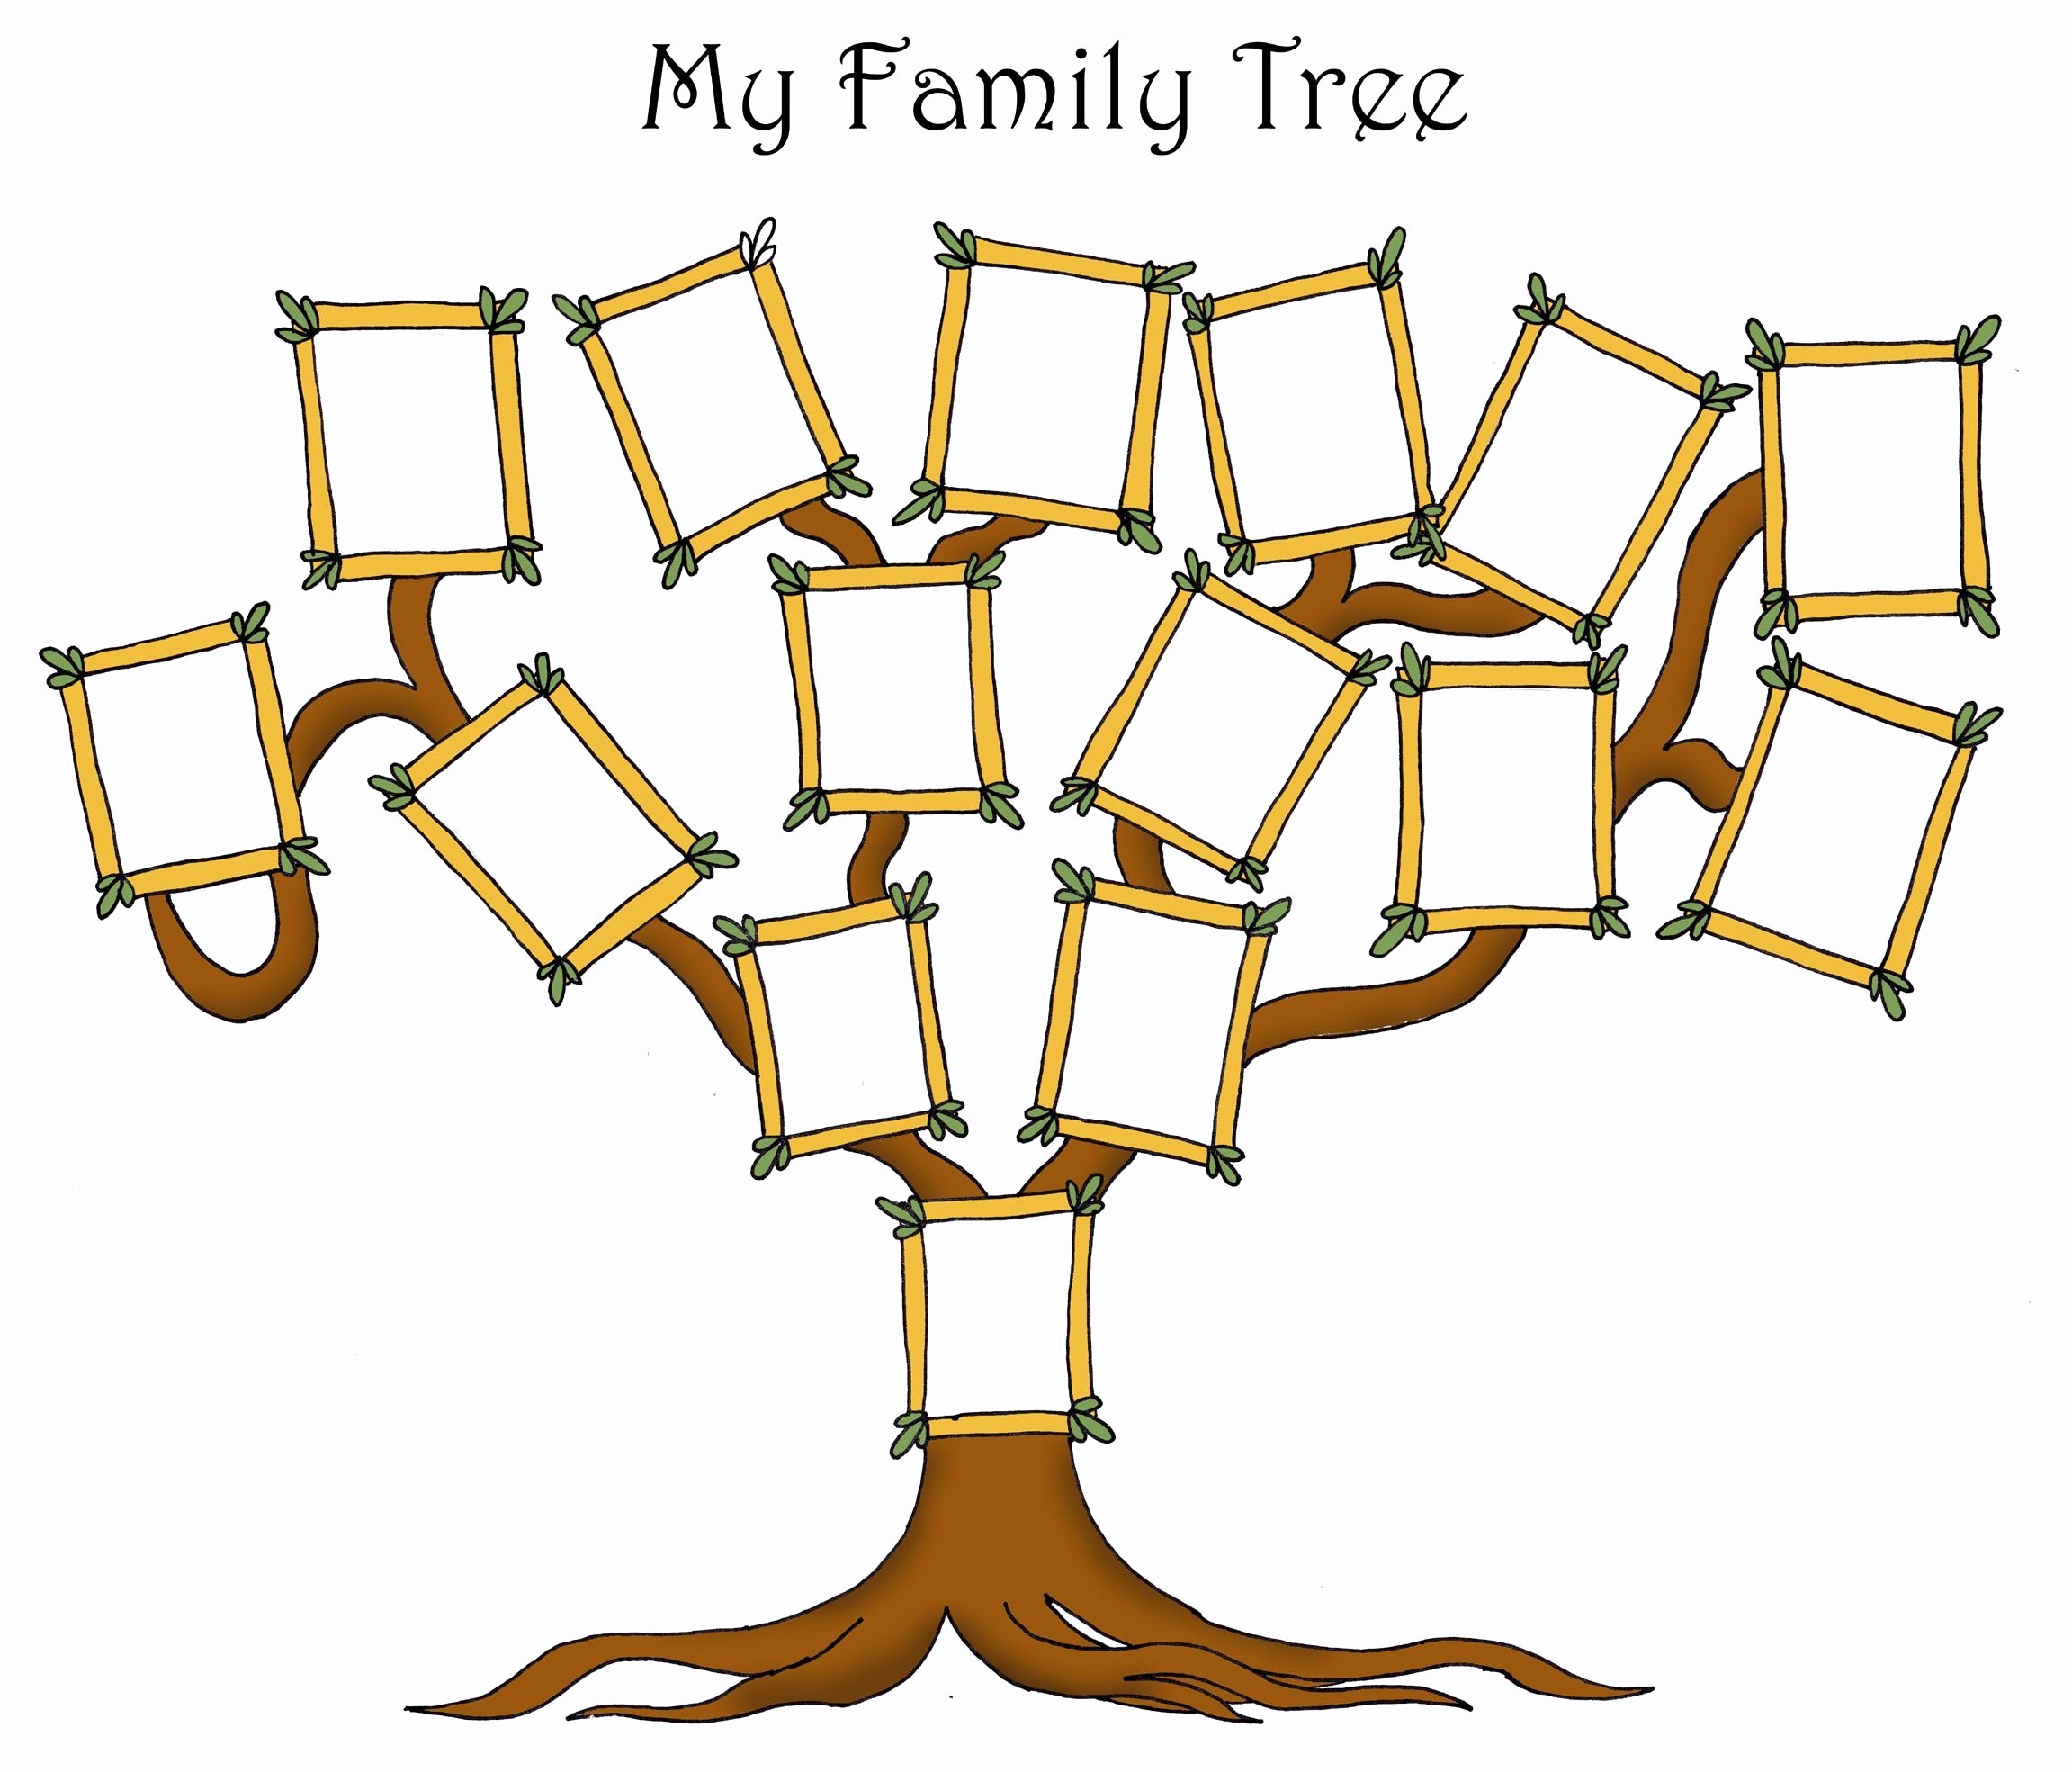 Family Tree Template Online Awesome Free Editable Family Tree Template Daily Roabox